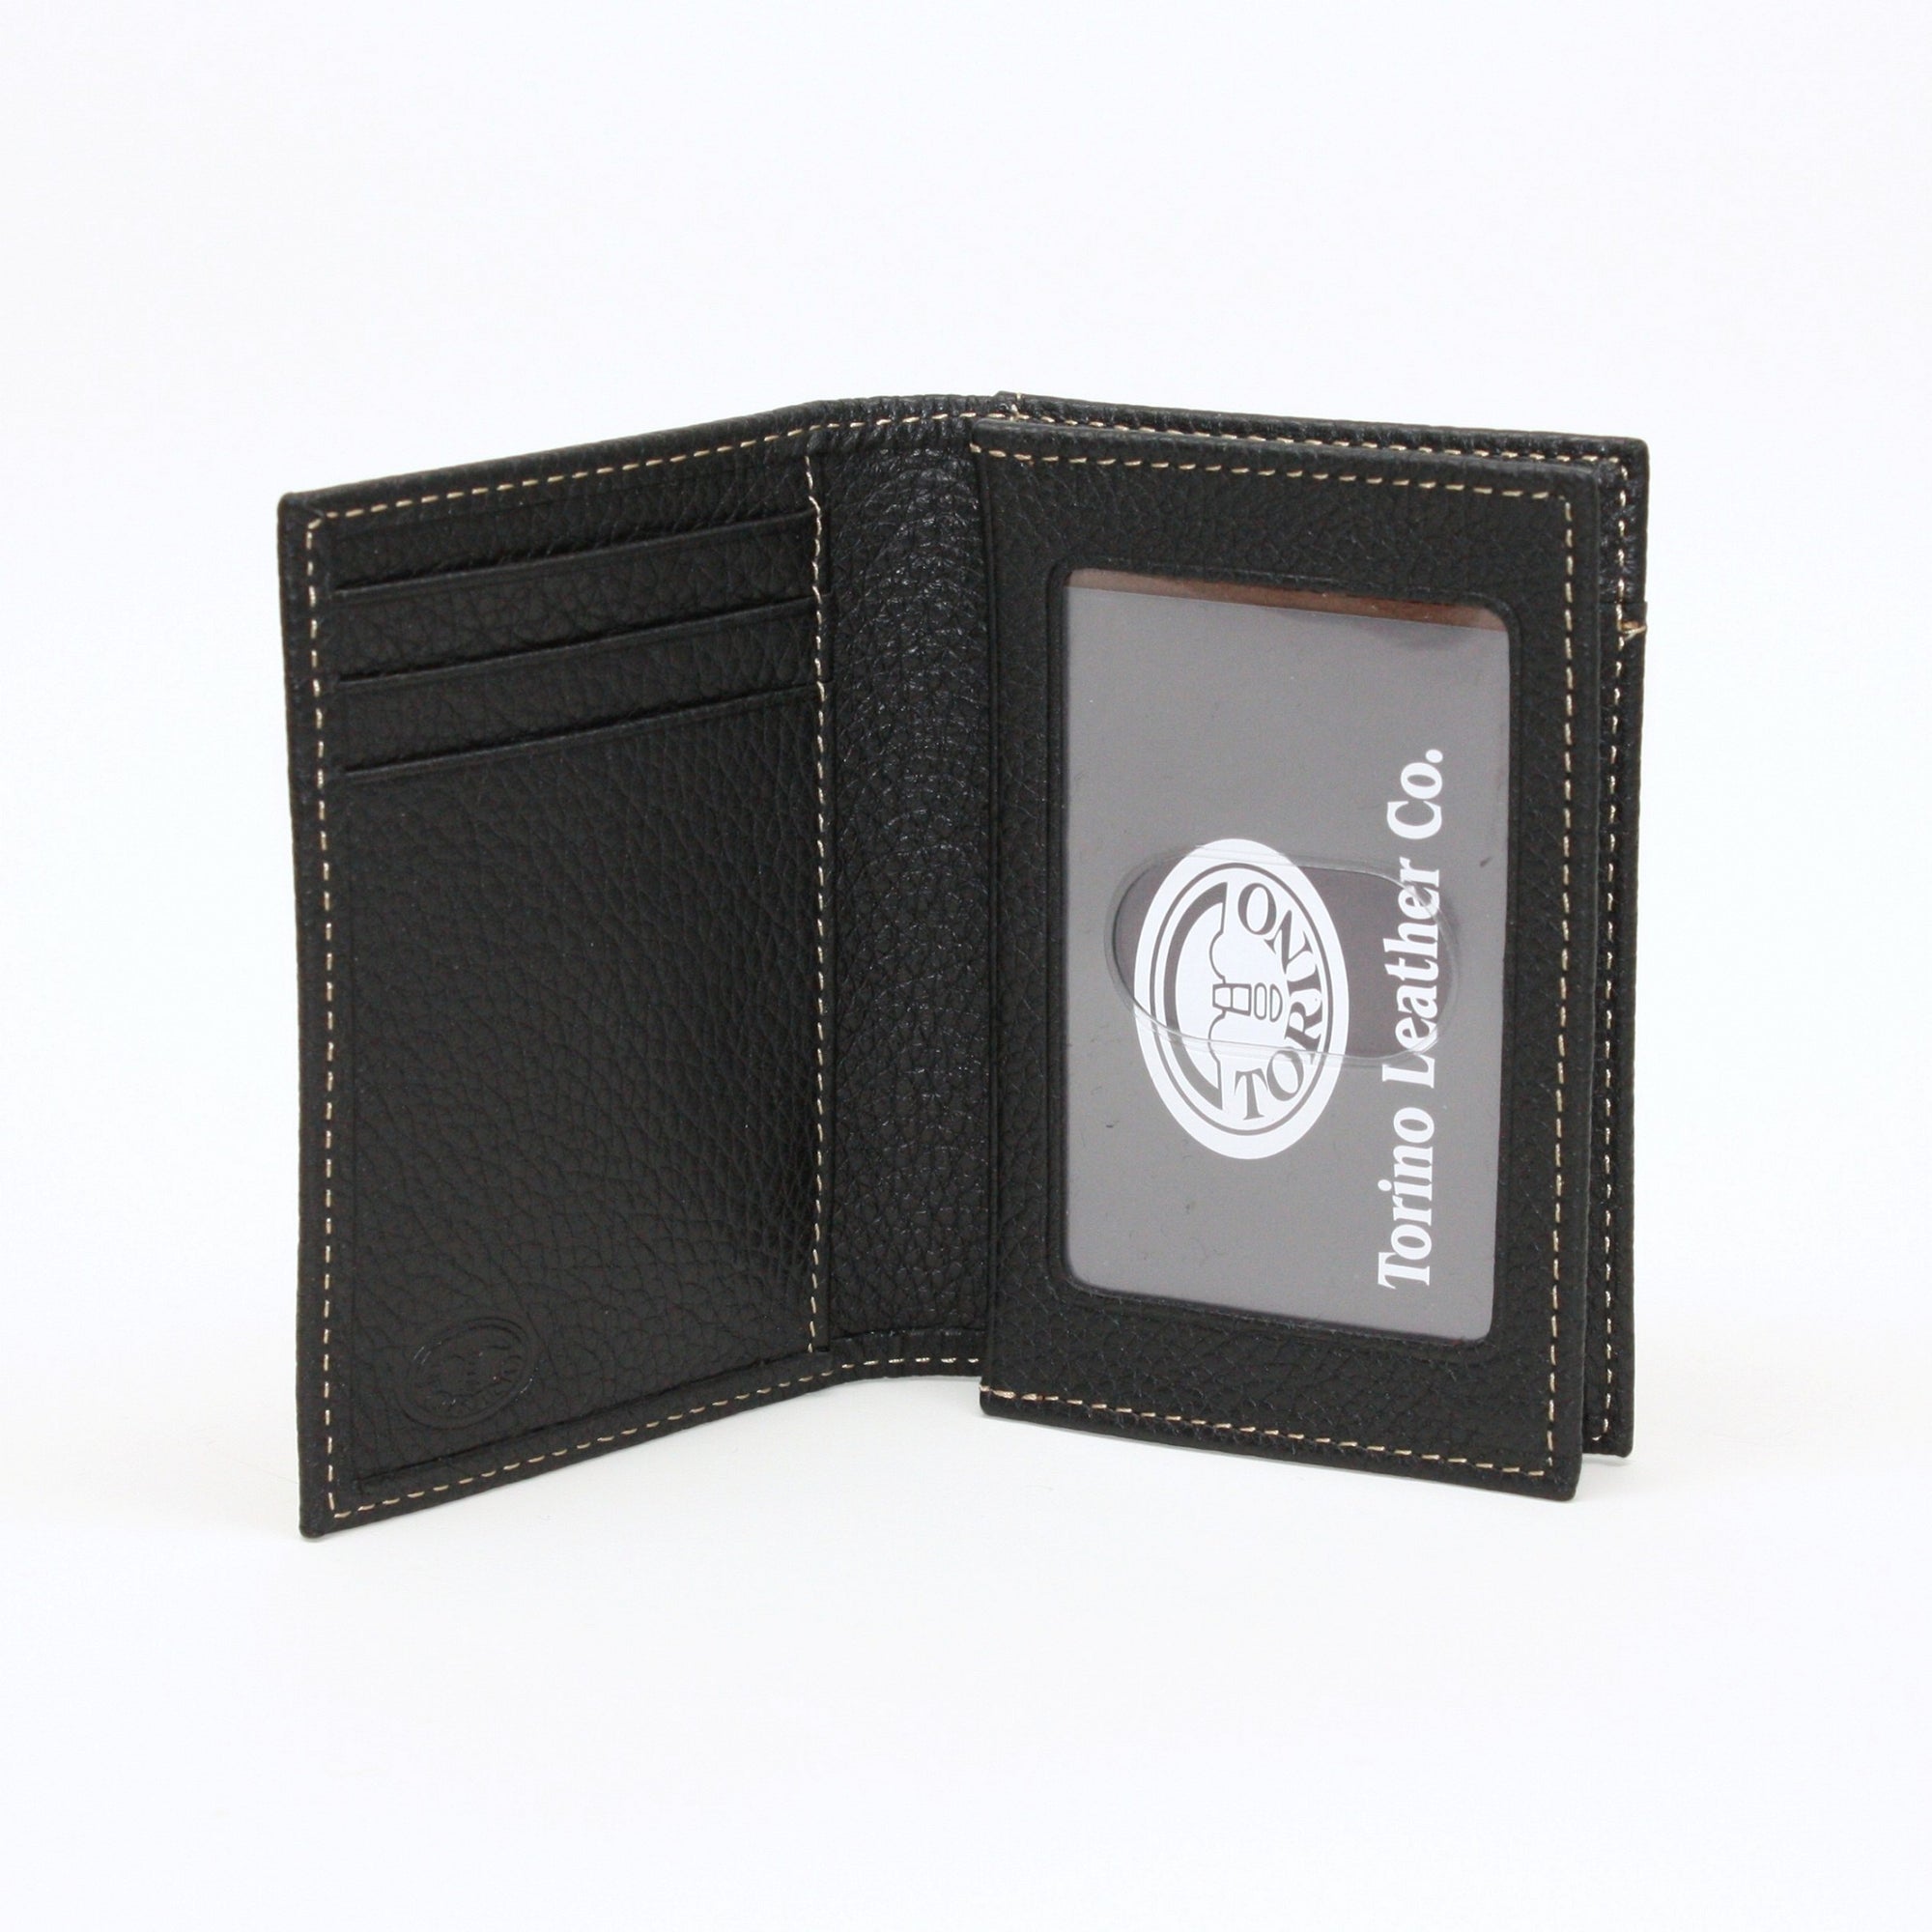 Tumbled Glove Leather Gusseted Card Case in Black By Torino Leather